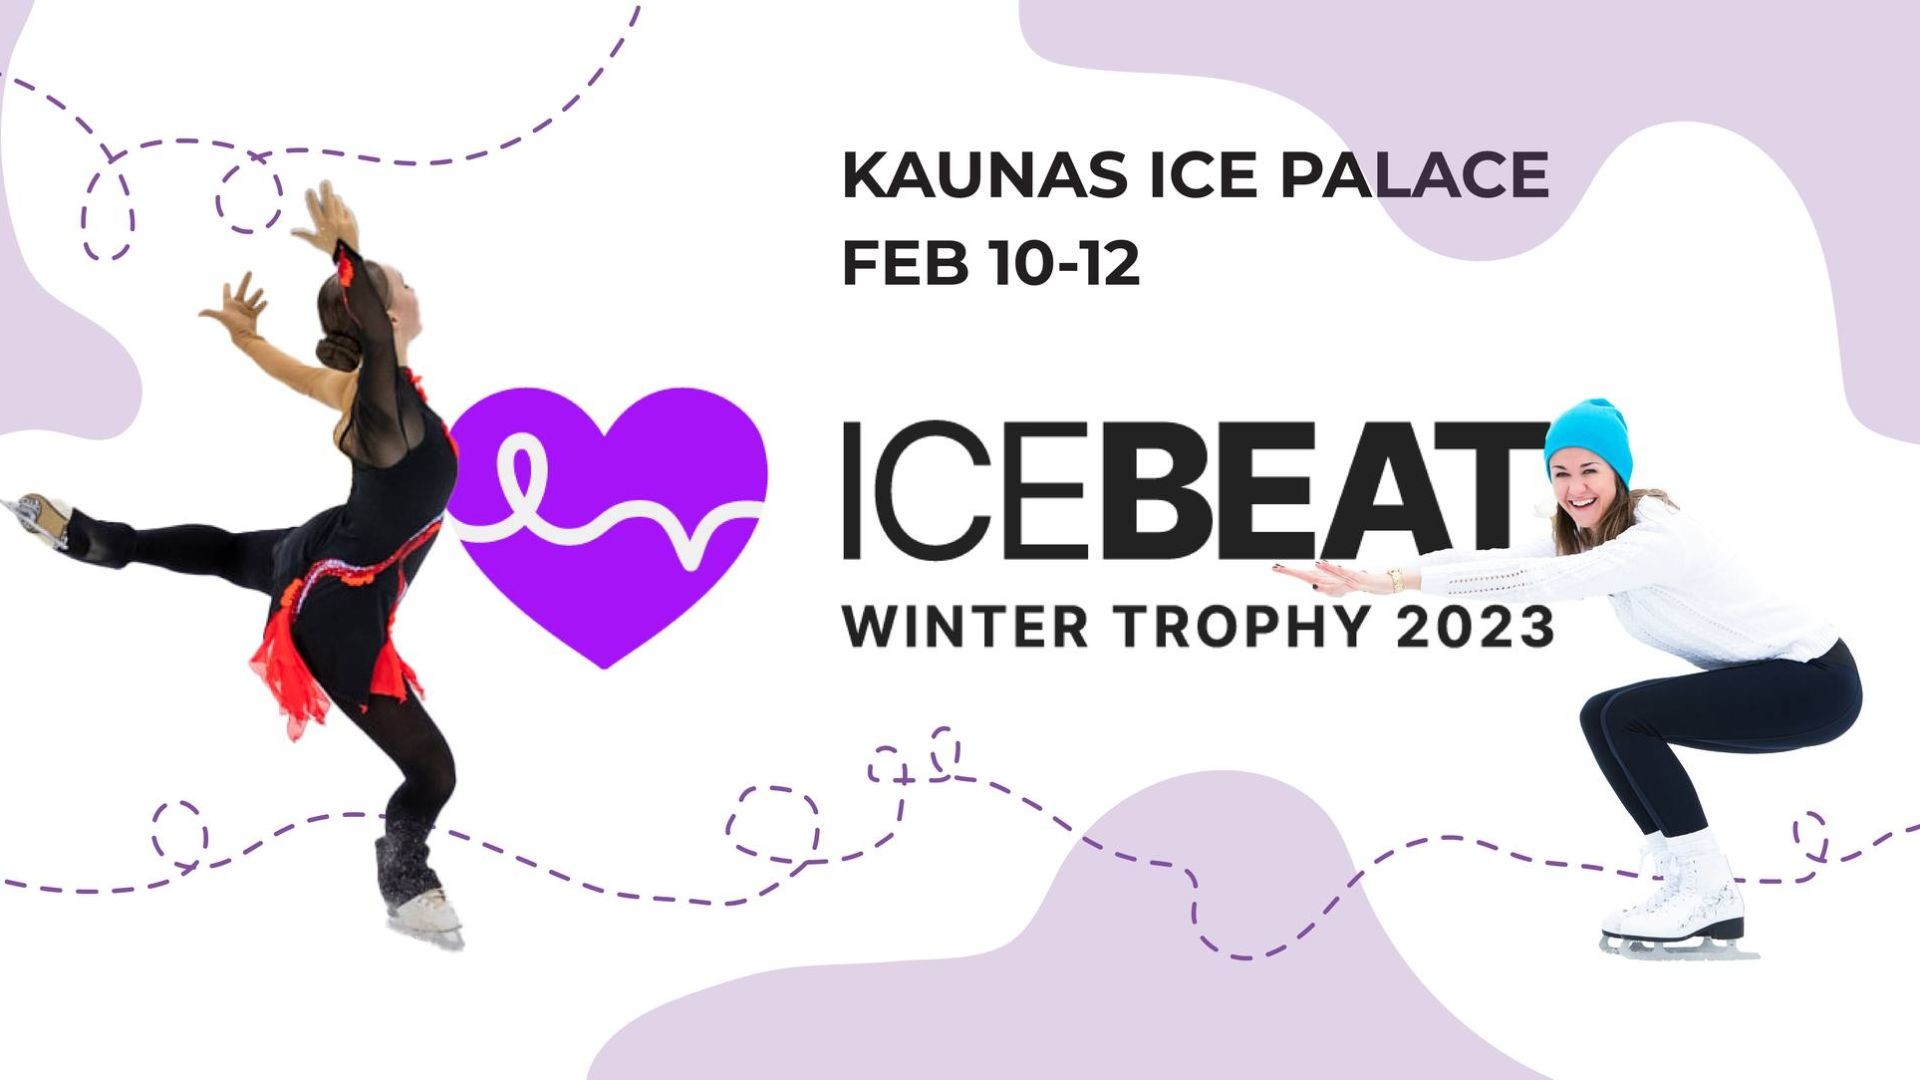 Day 2 | Icebeat Winter Trophy 2023